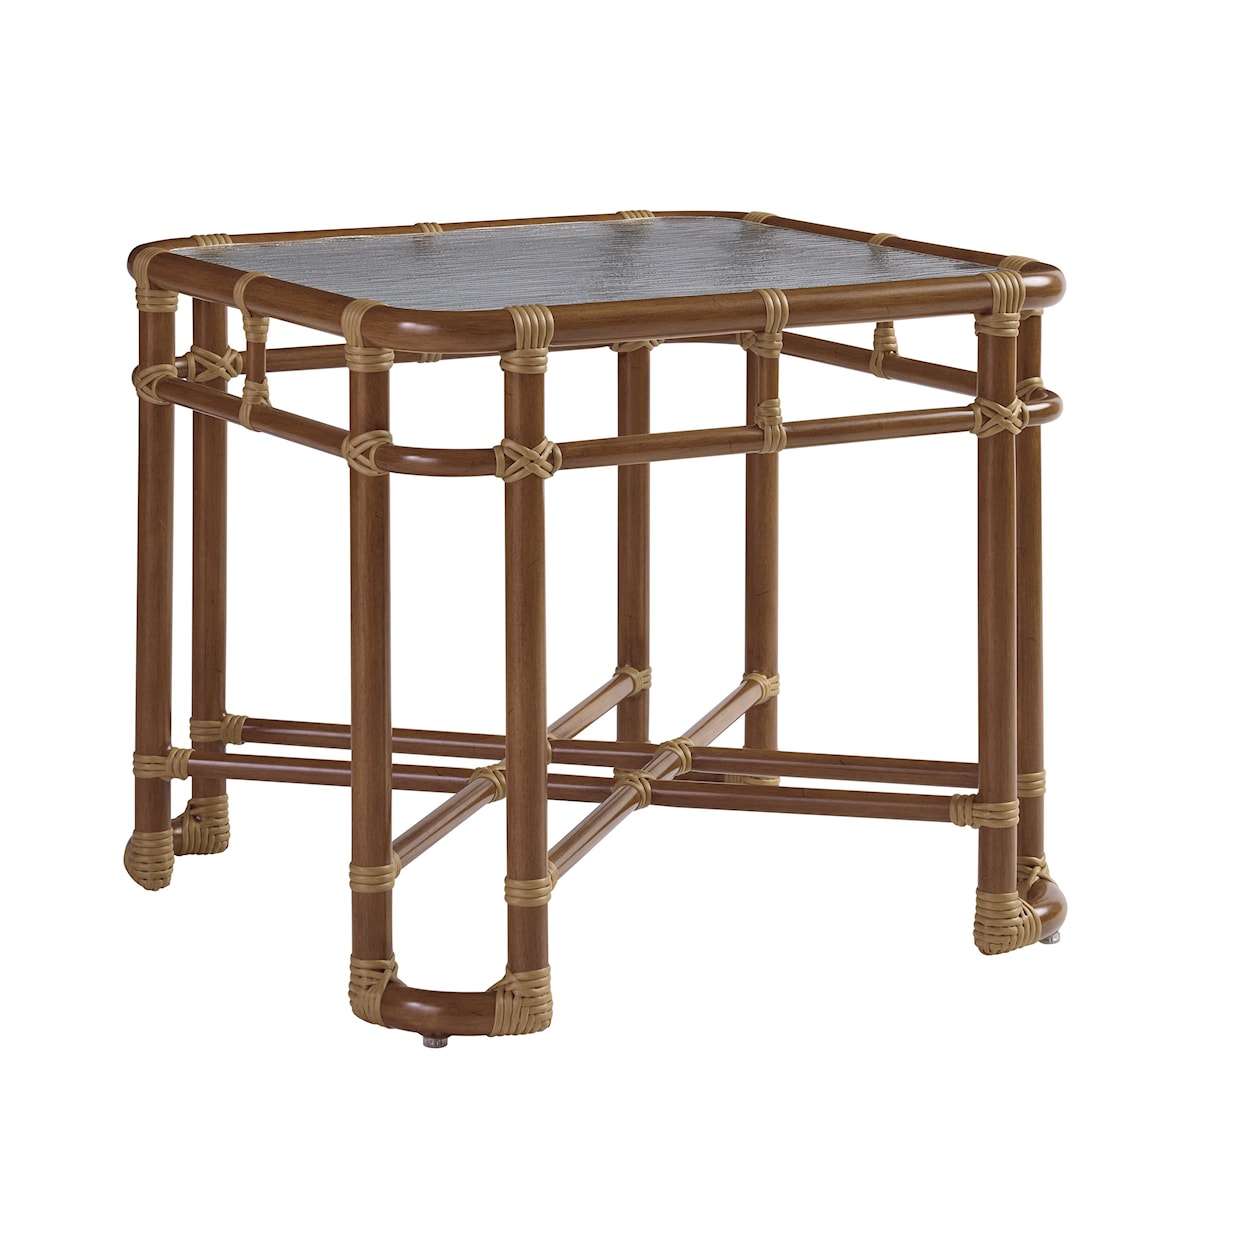 Tommy Bahama Outdoor Living Sandpiper Bay Outdoor Square End Table